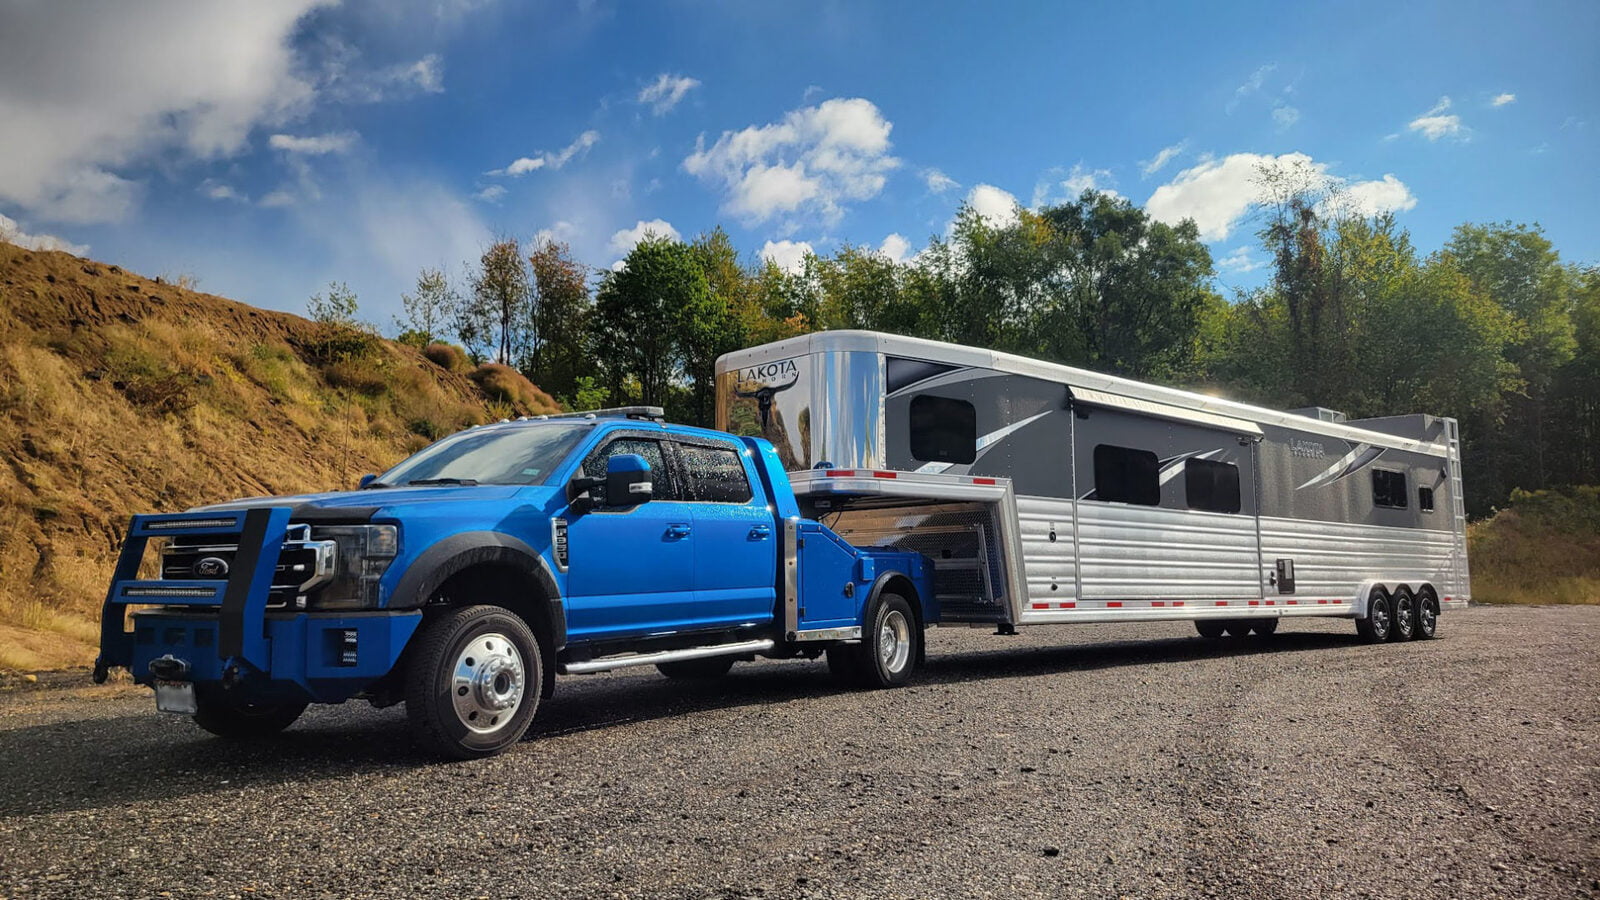 A Ford F-550, configured as a fifth wheel hauler truck, efficiently towing a gooseneck horse trailer, demonstrating its versatility and power in hauling capabilities.